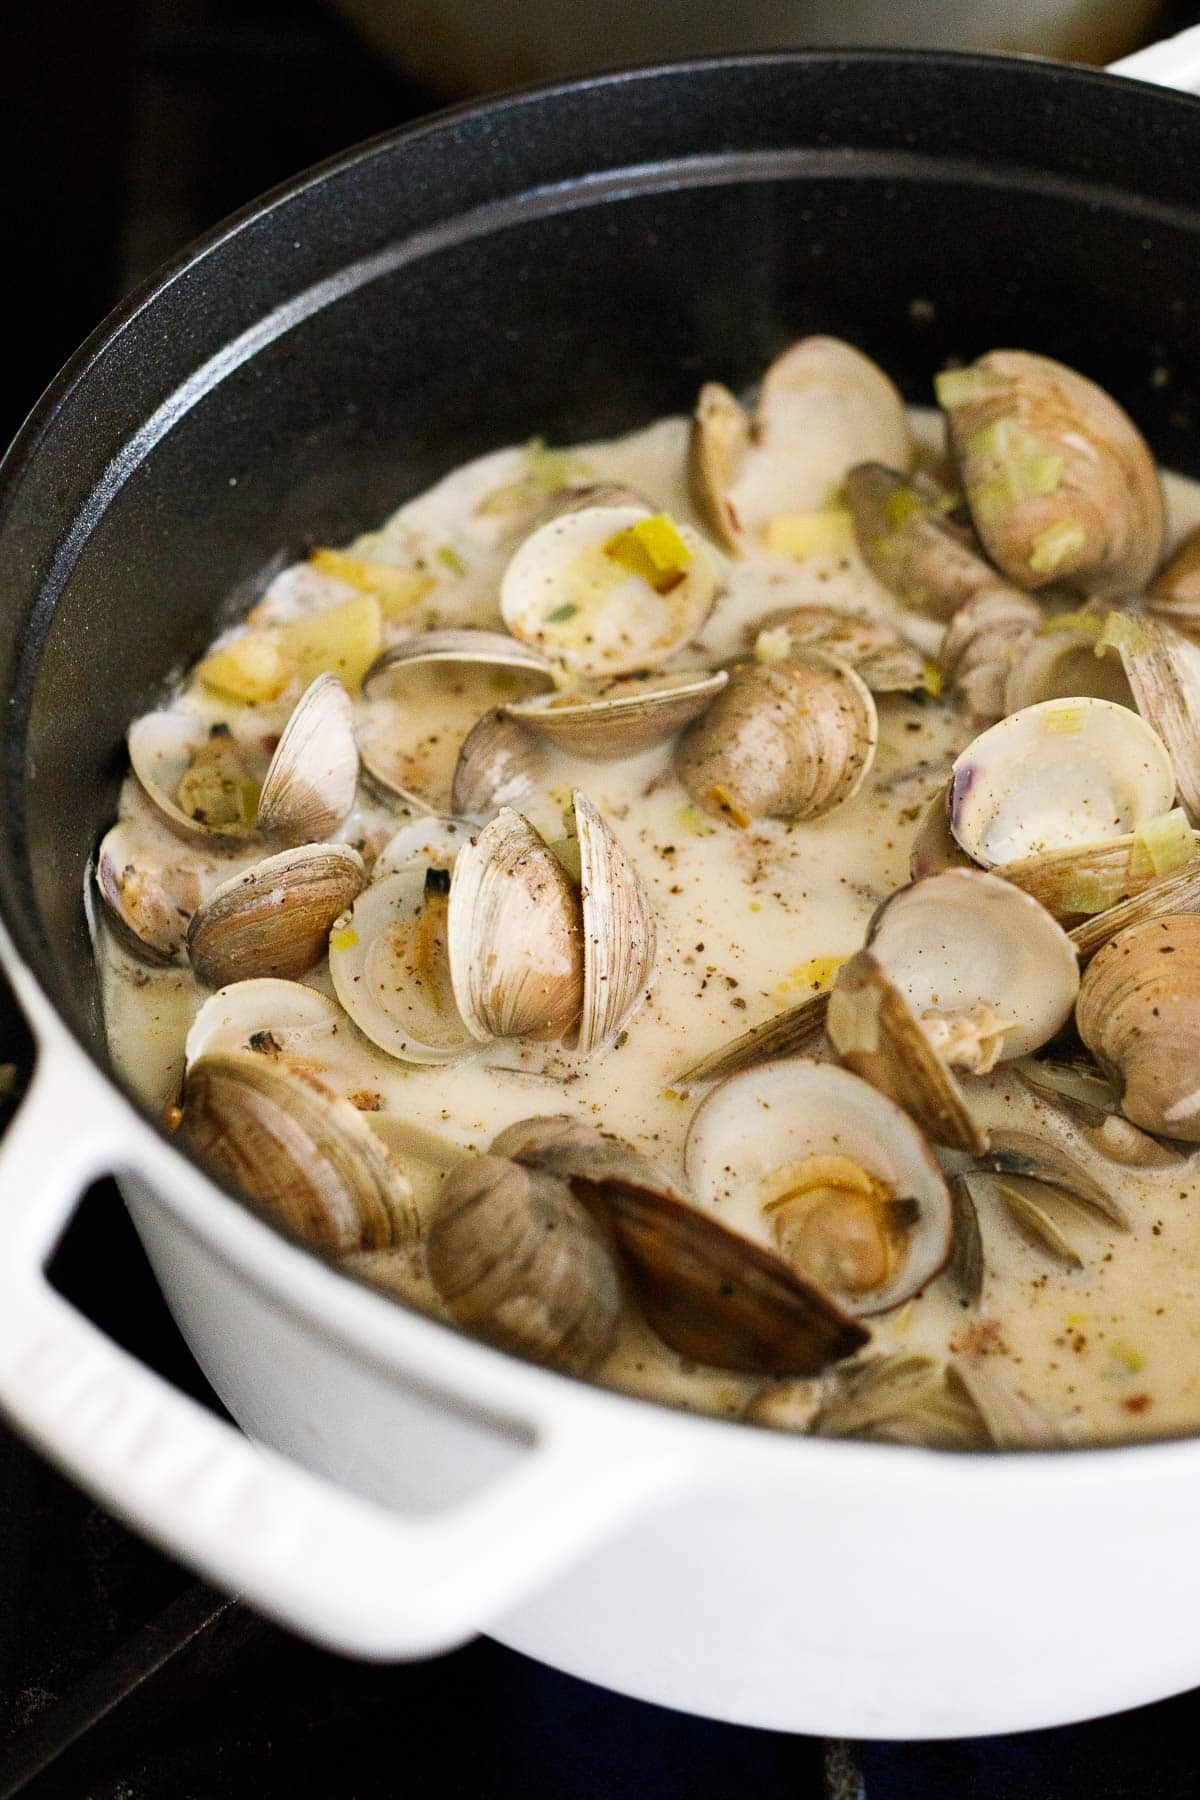 clams in shells added to soup pot with chowder